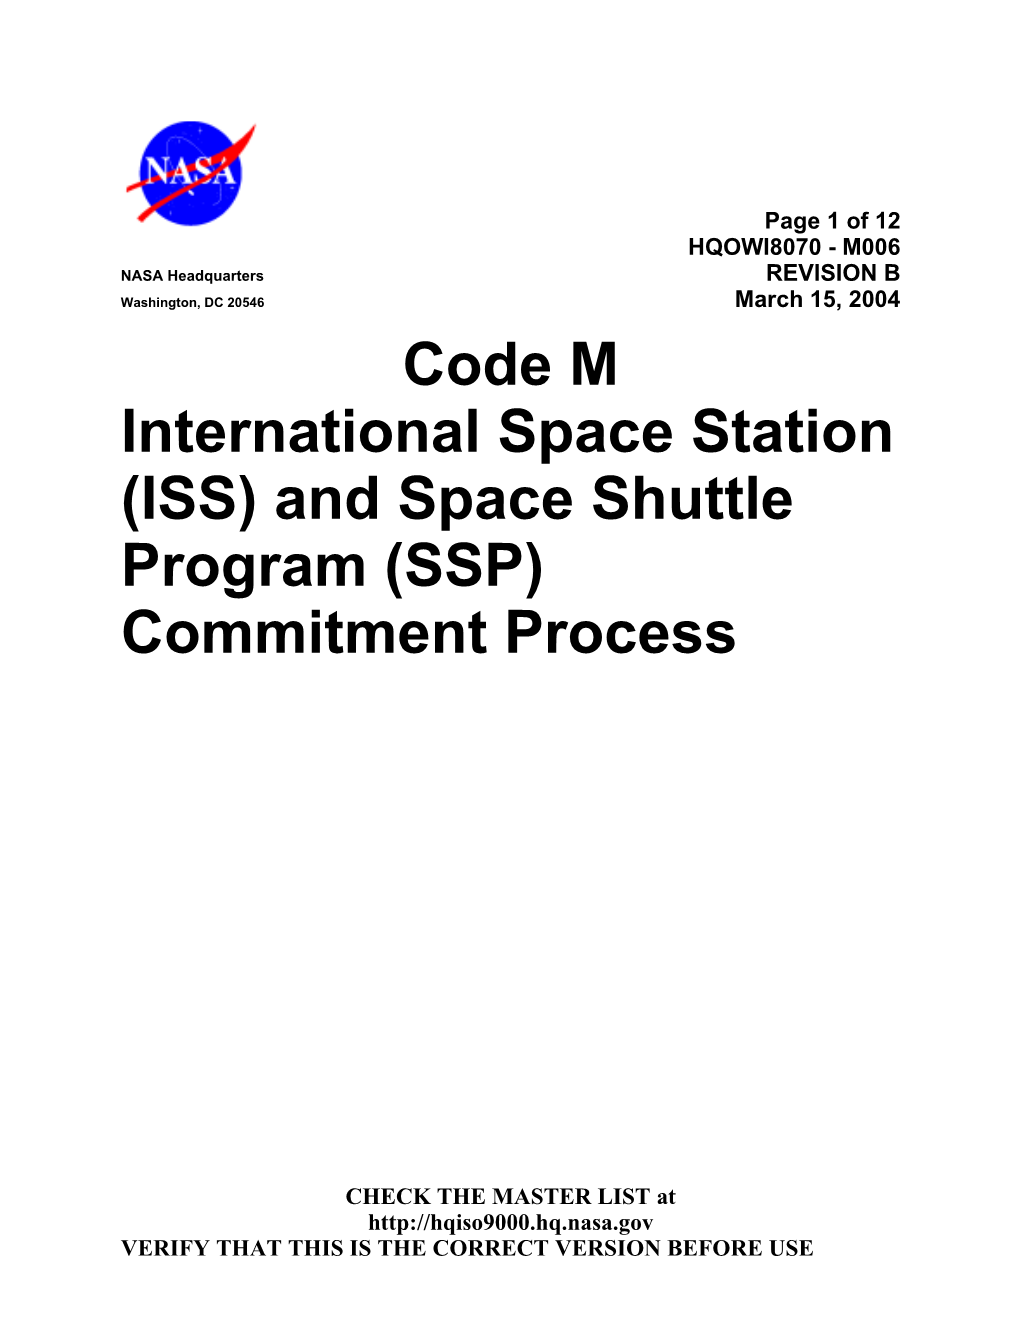 International Space Station (ISS) and Space Shuttle Program (SSP) Commitment Process